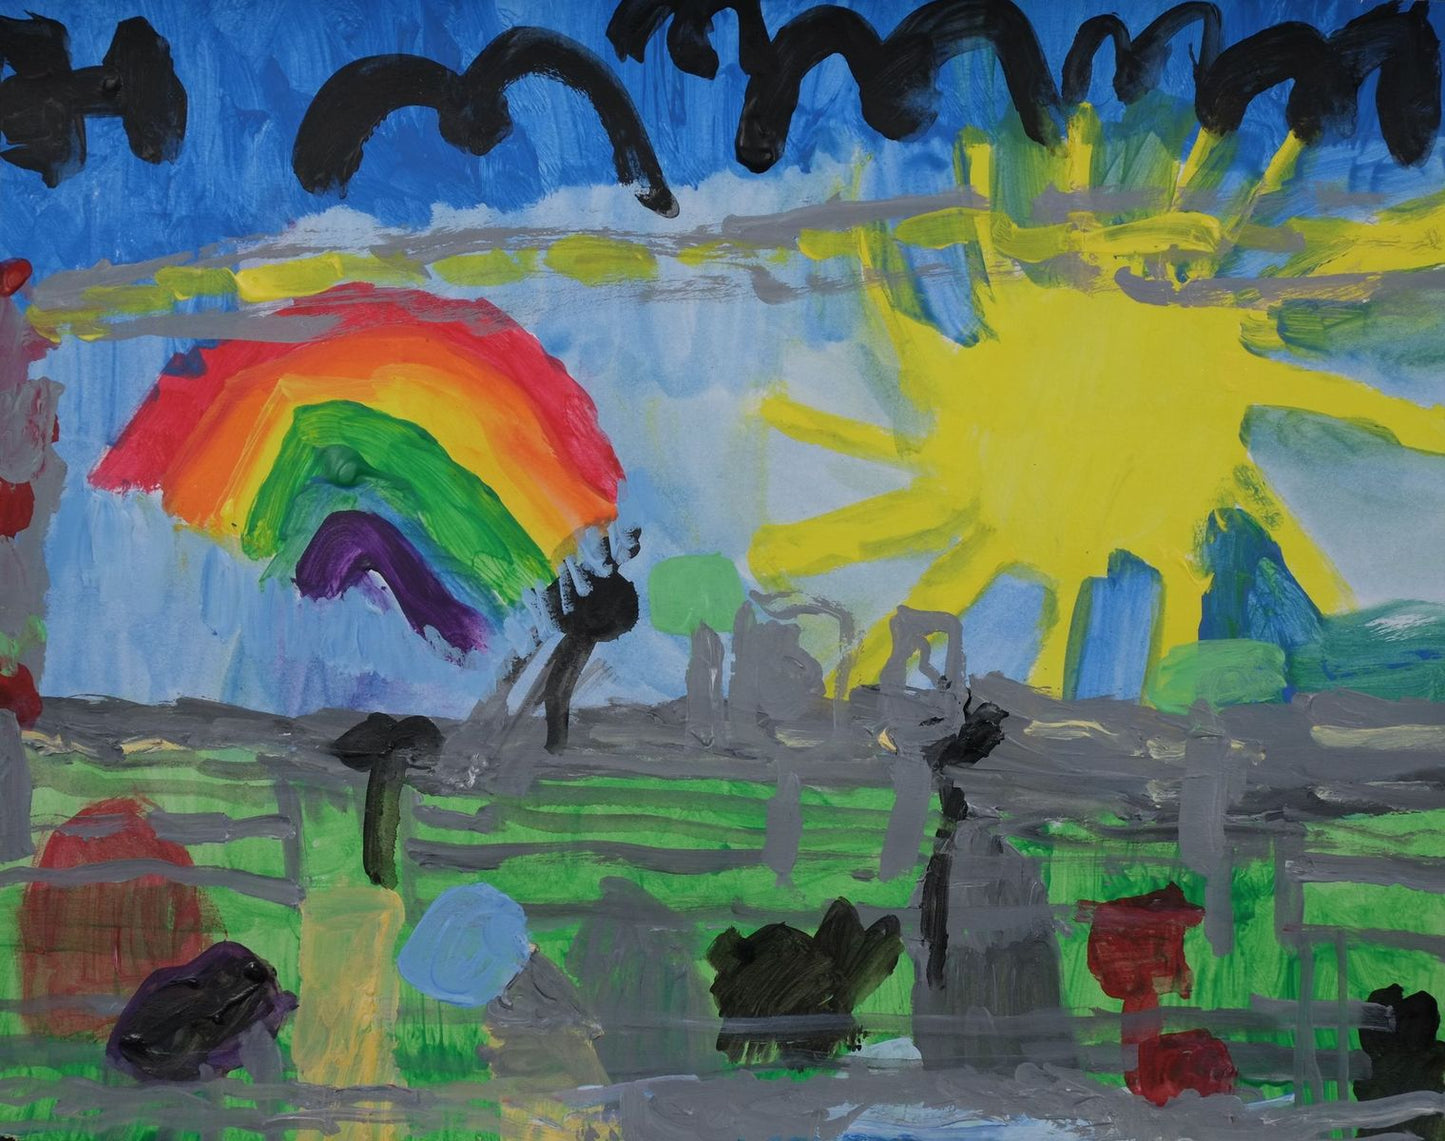 Acrylic on paper artwork depicting a day at the farm with yellow sun against blue sky with black birds, a rainbow, gray fence and farm animals